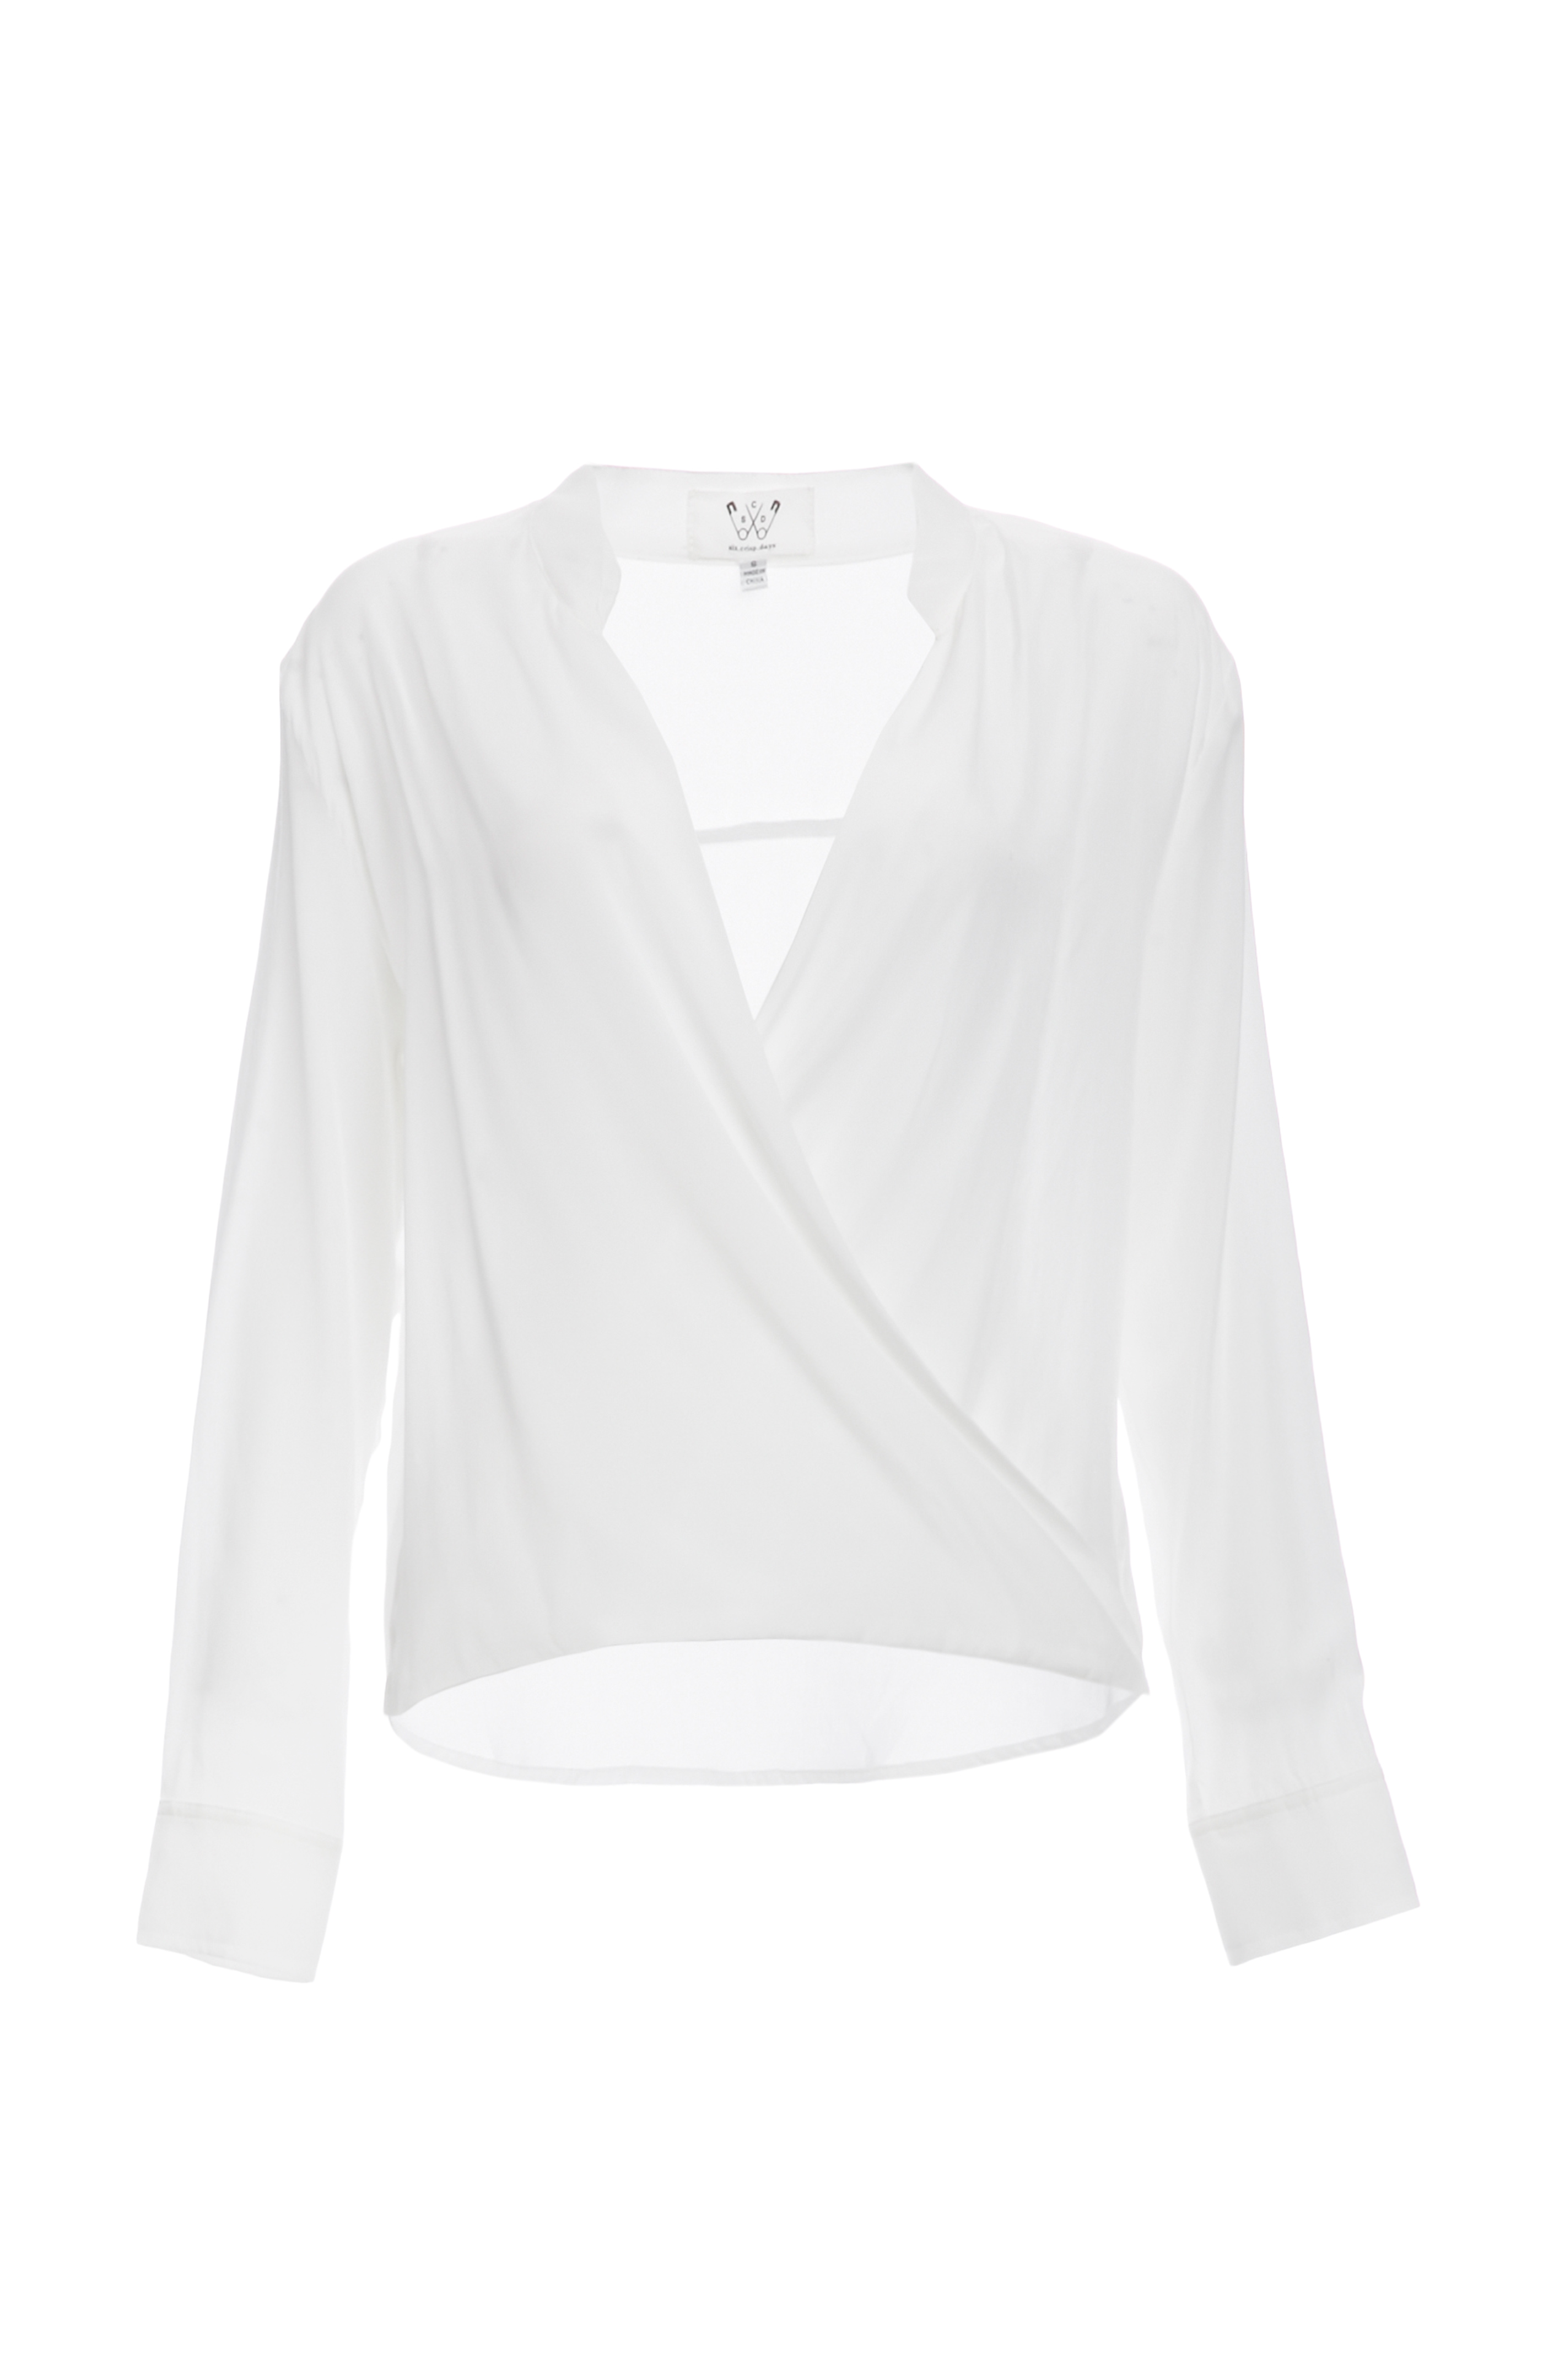 Six Crisp Days Twisted Wrap Blouse in Ivory | DAILYLOOK